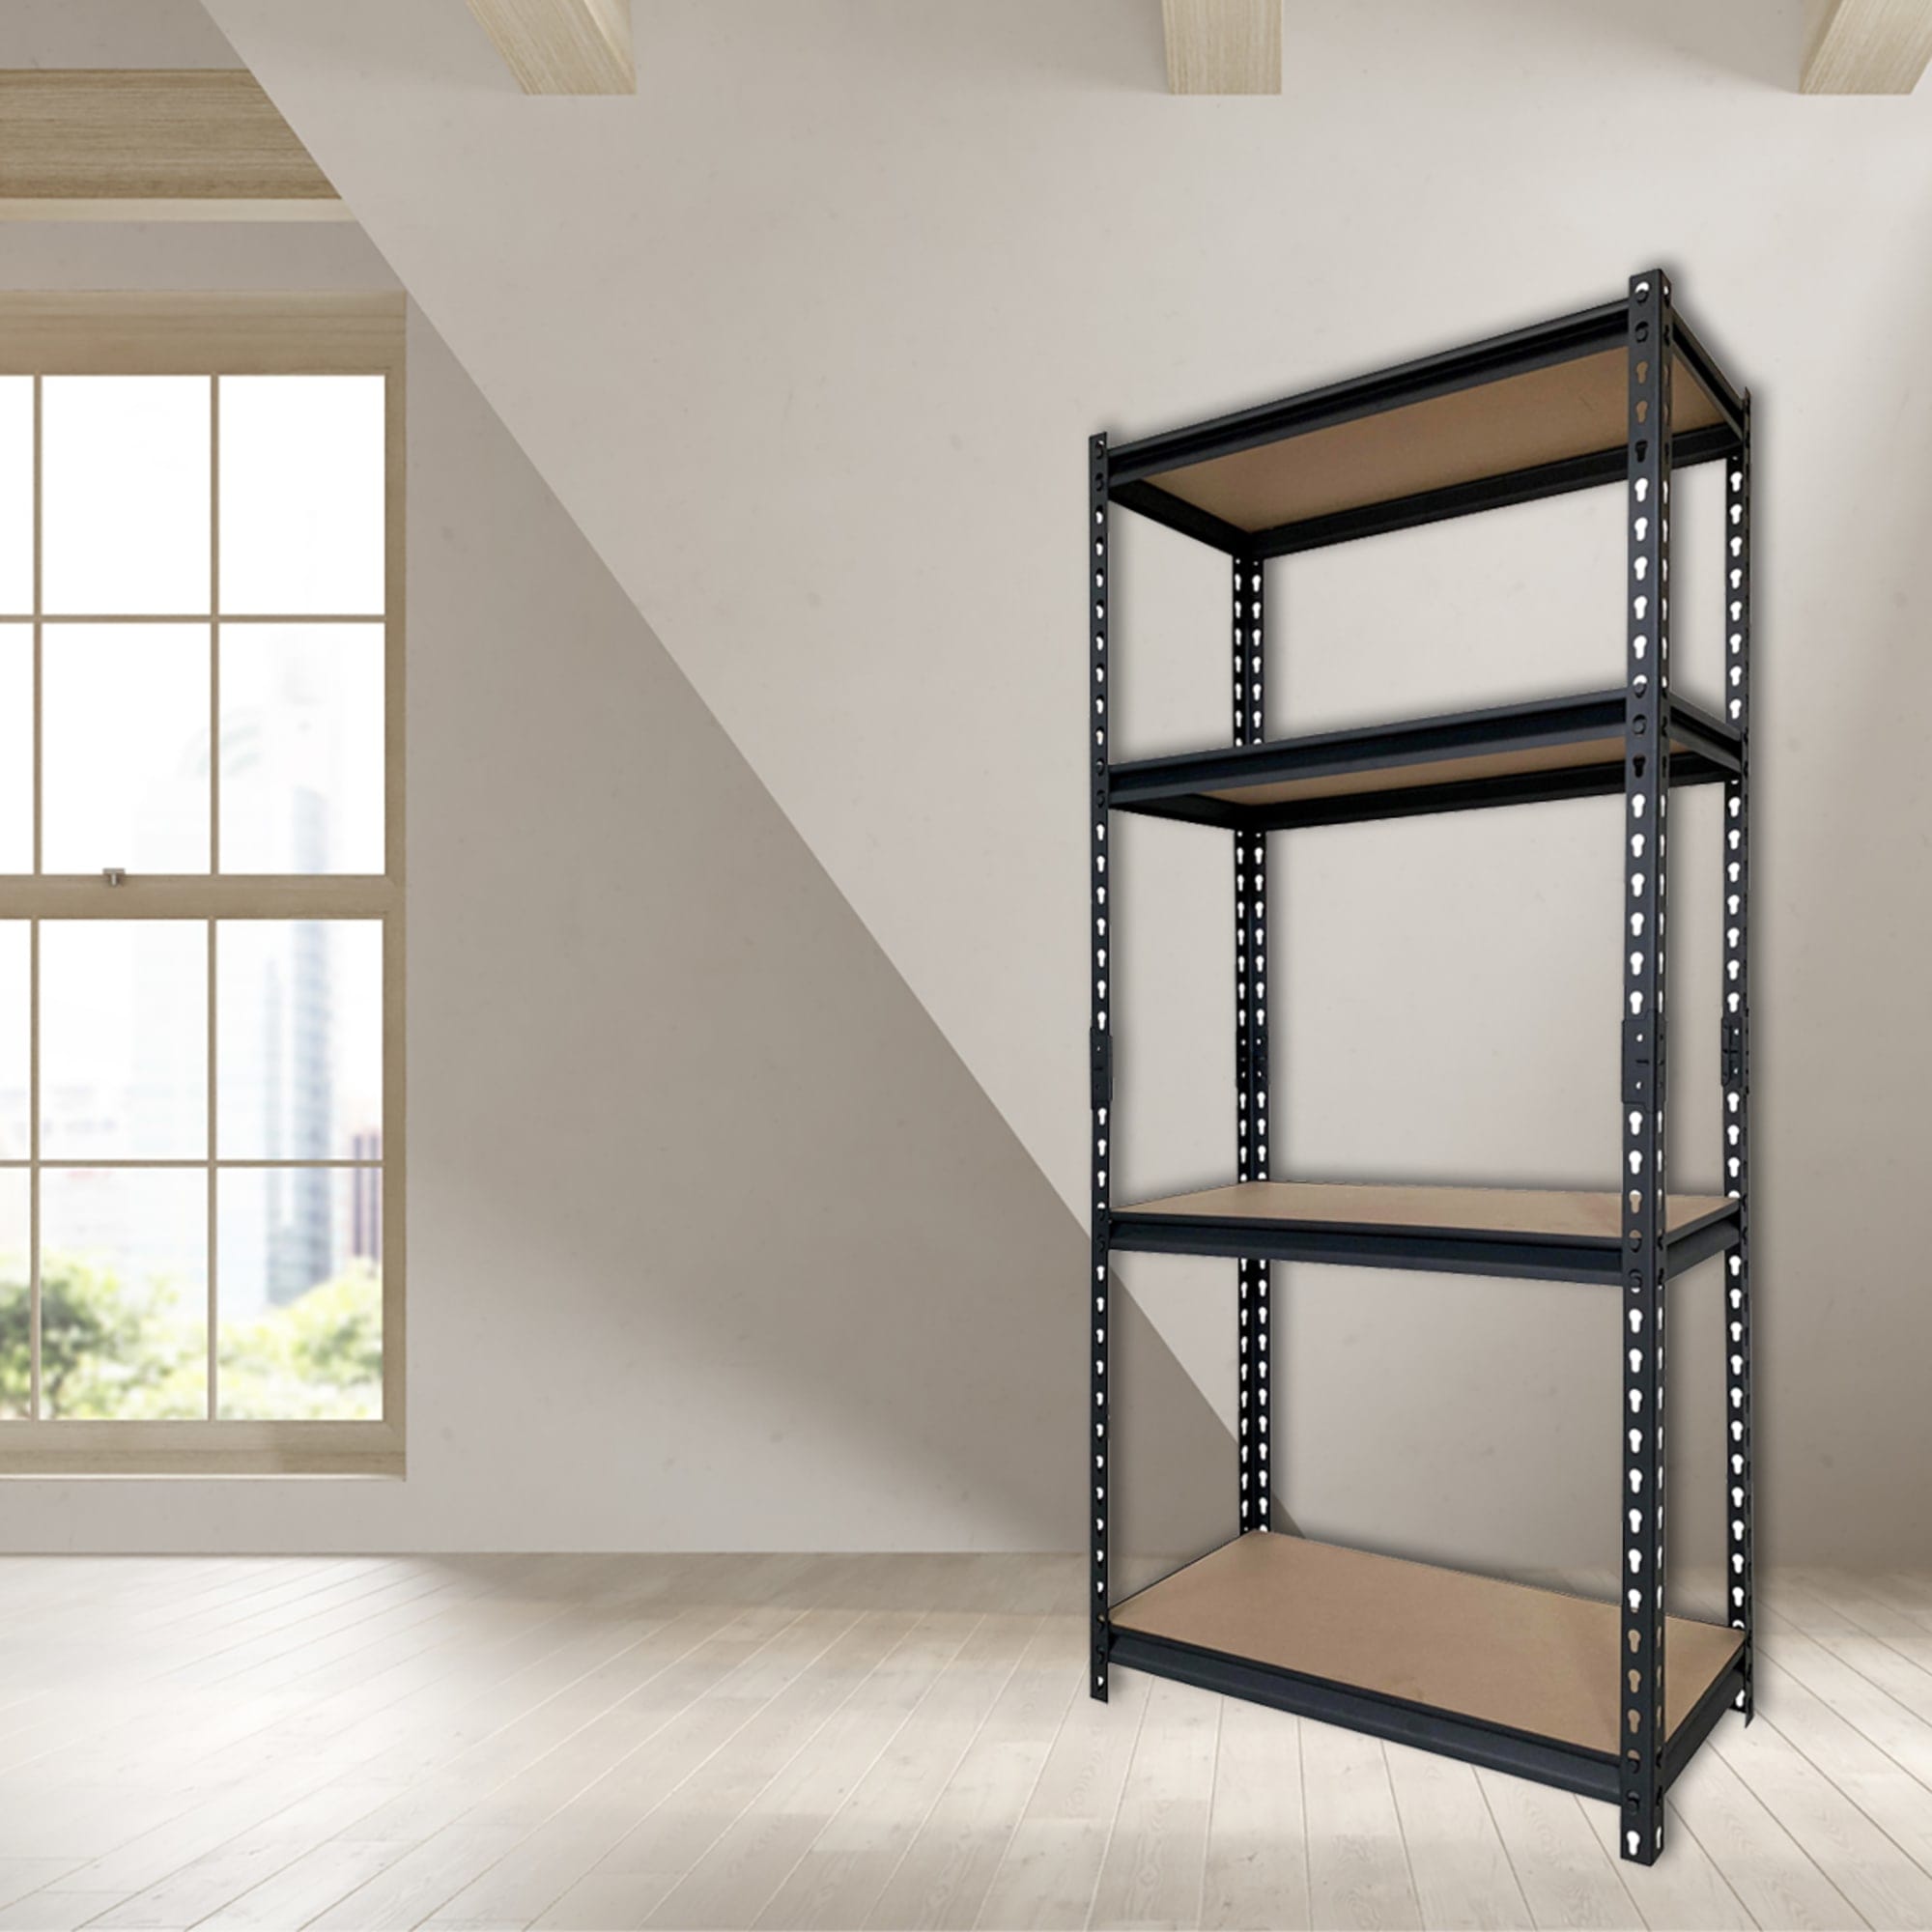 Home Basics Quick Assembly 4 Tier Heavy Duty Shelf, (25" x 59"), Black
 $60.00 EACH, CASE PACK OF 1